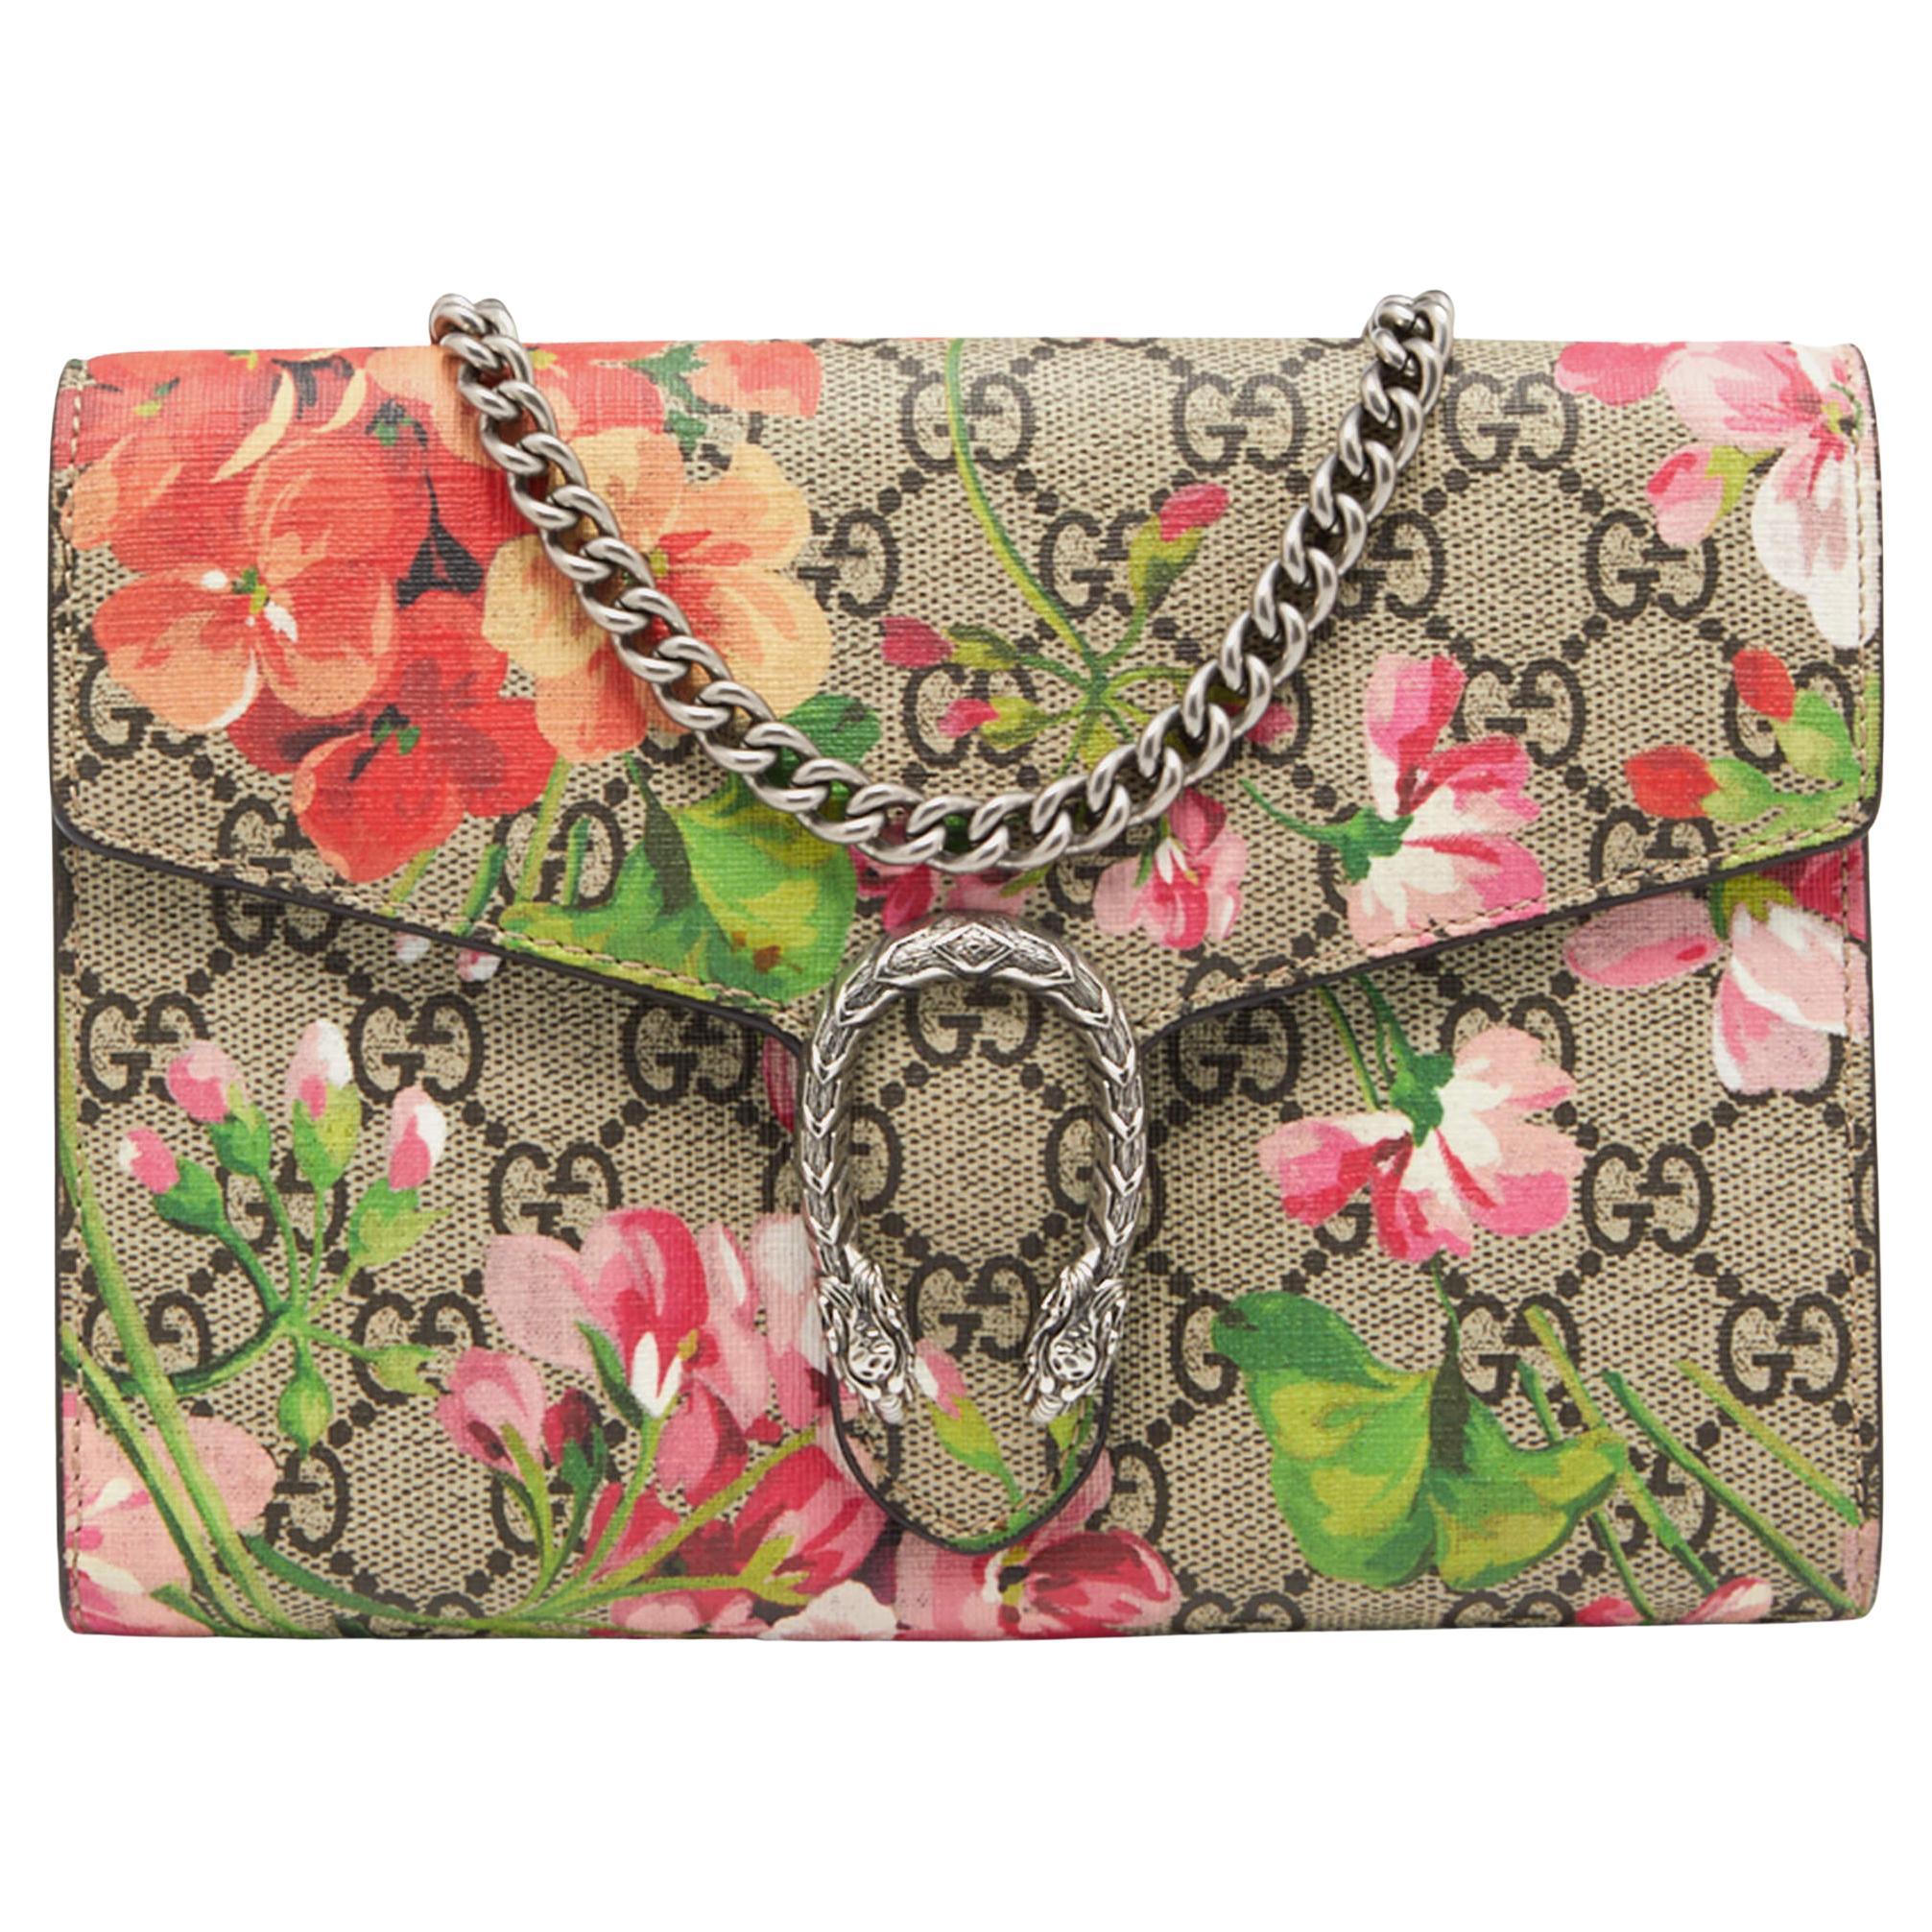 Gucci Bloom Pouch - For Sale on 1stDibs  gucci bloom clutch bag, gucci  bloom pochette, gucci floral pouch